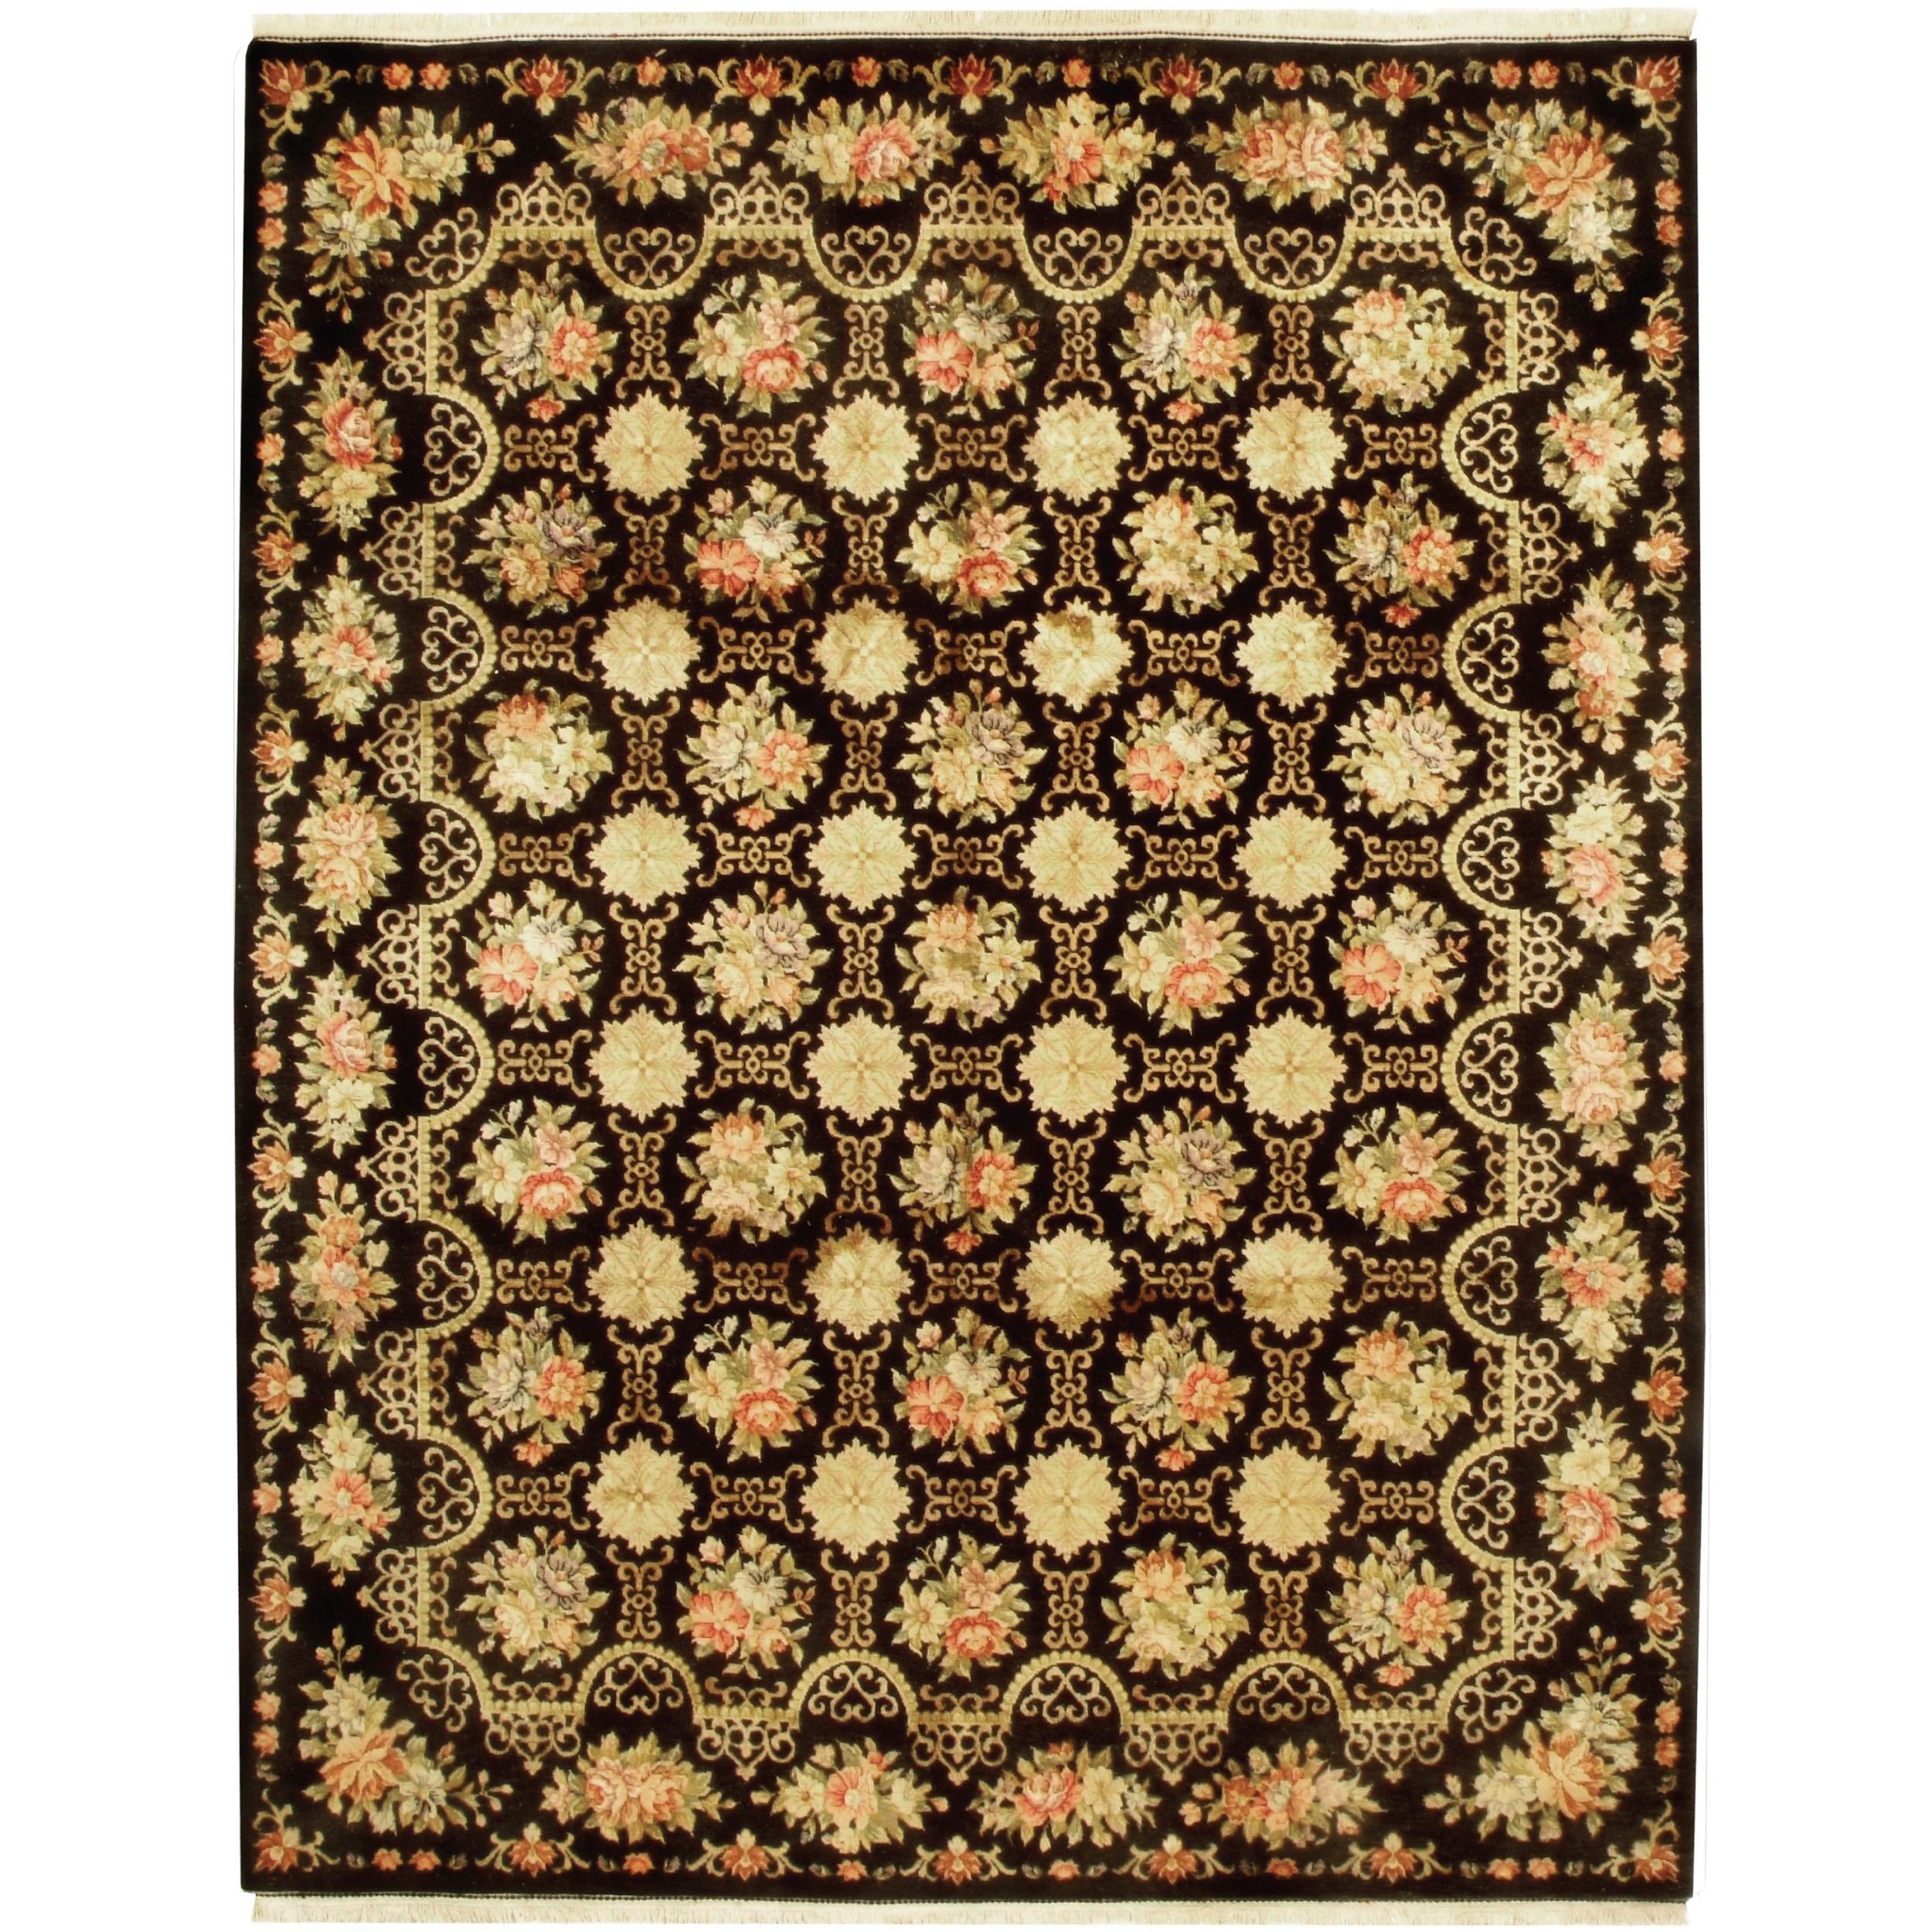 Chinese Luxury European Hand-Knotted Cambridge Black 12x15 Rug For Sale